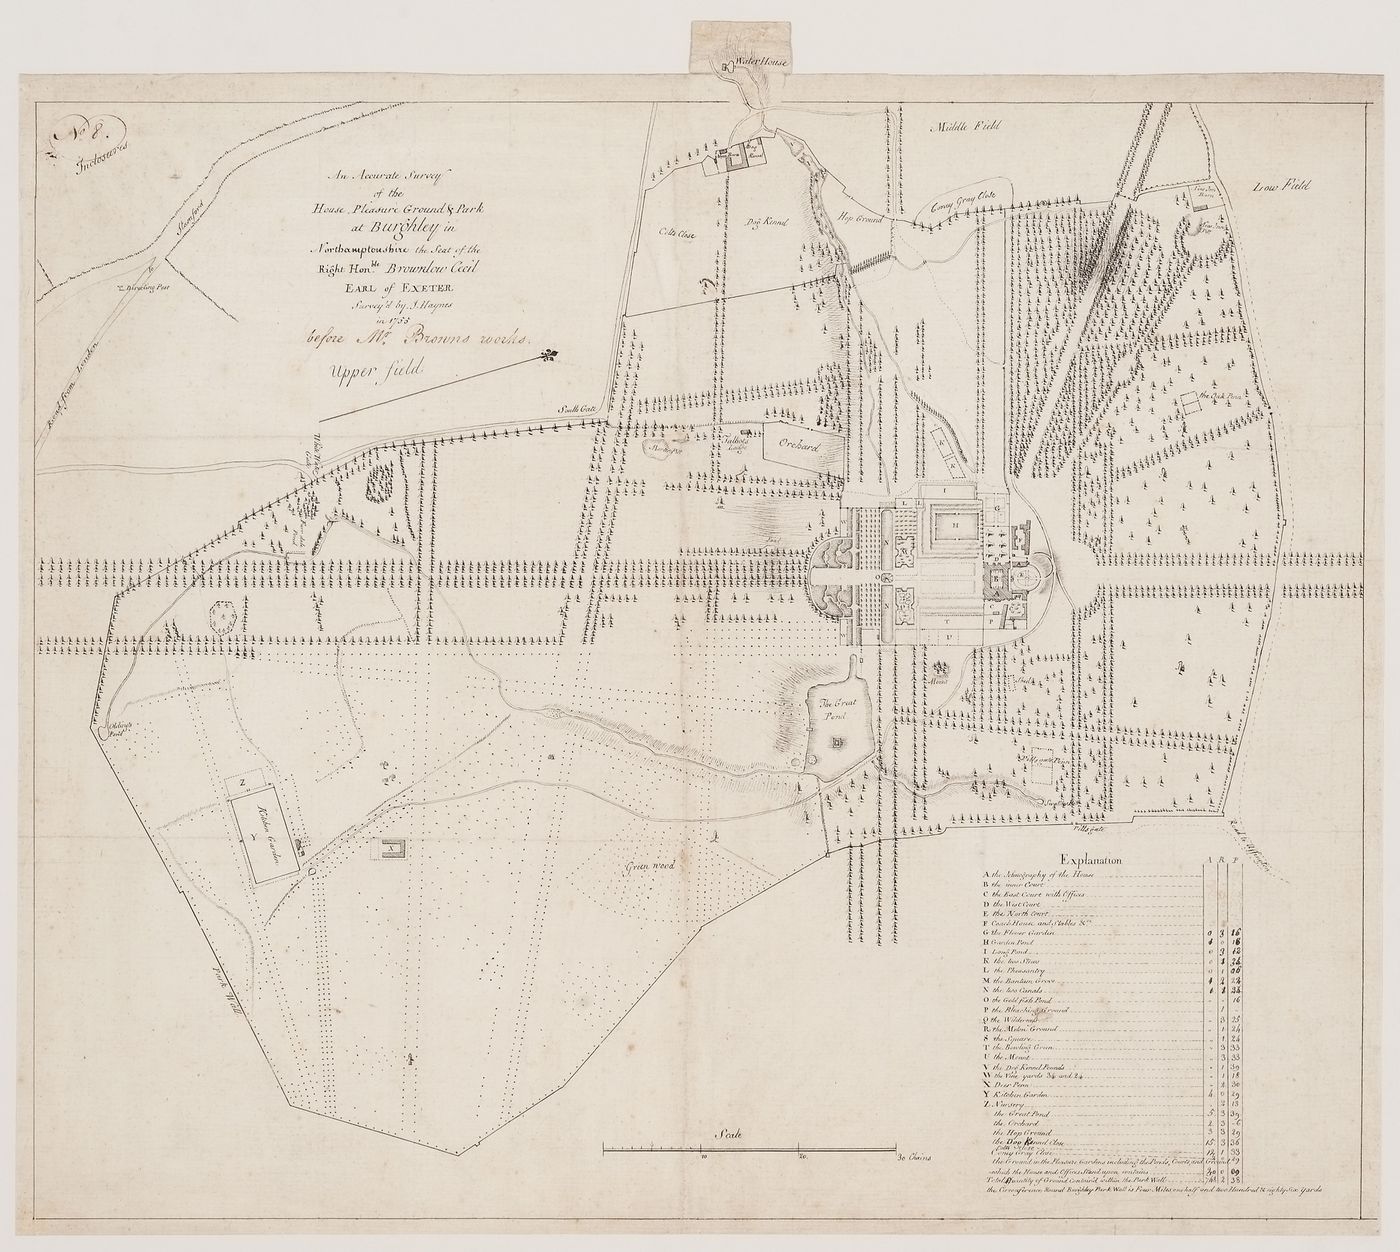 A survey plan of Burghley House and its grounds